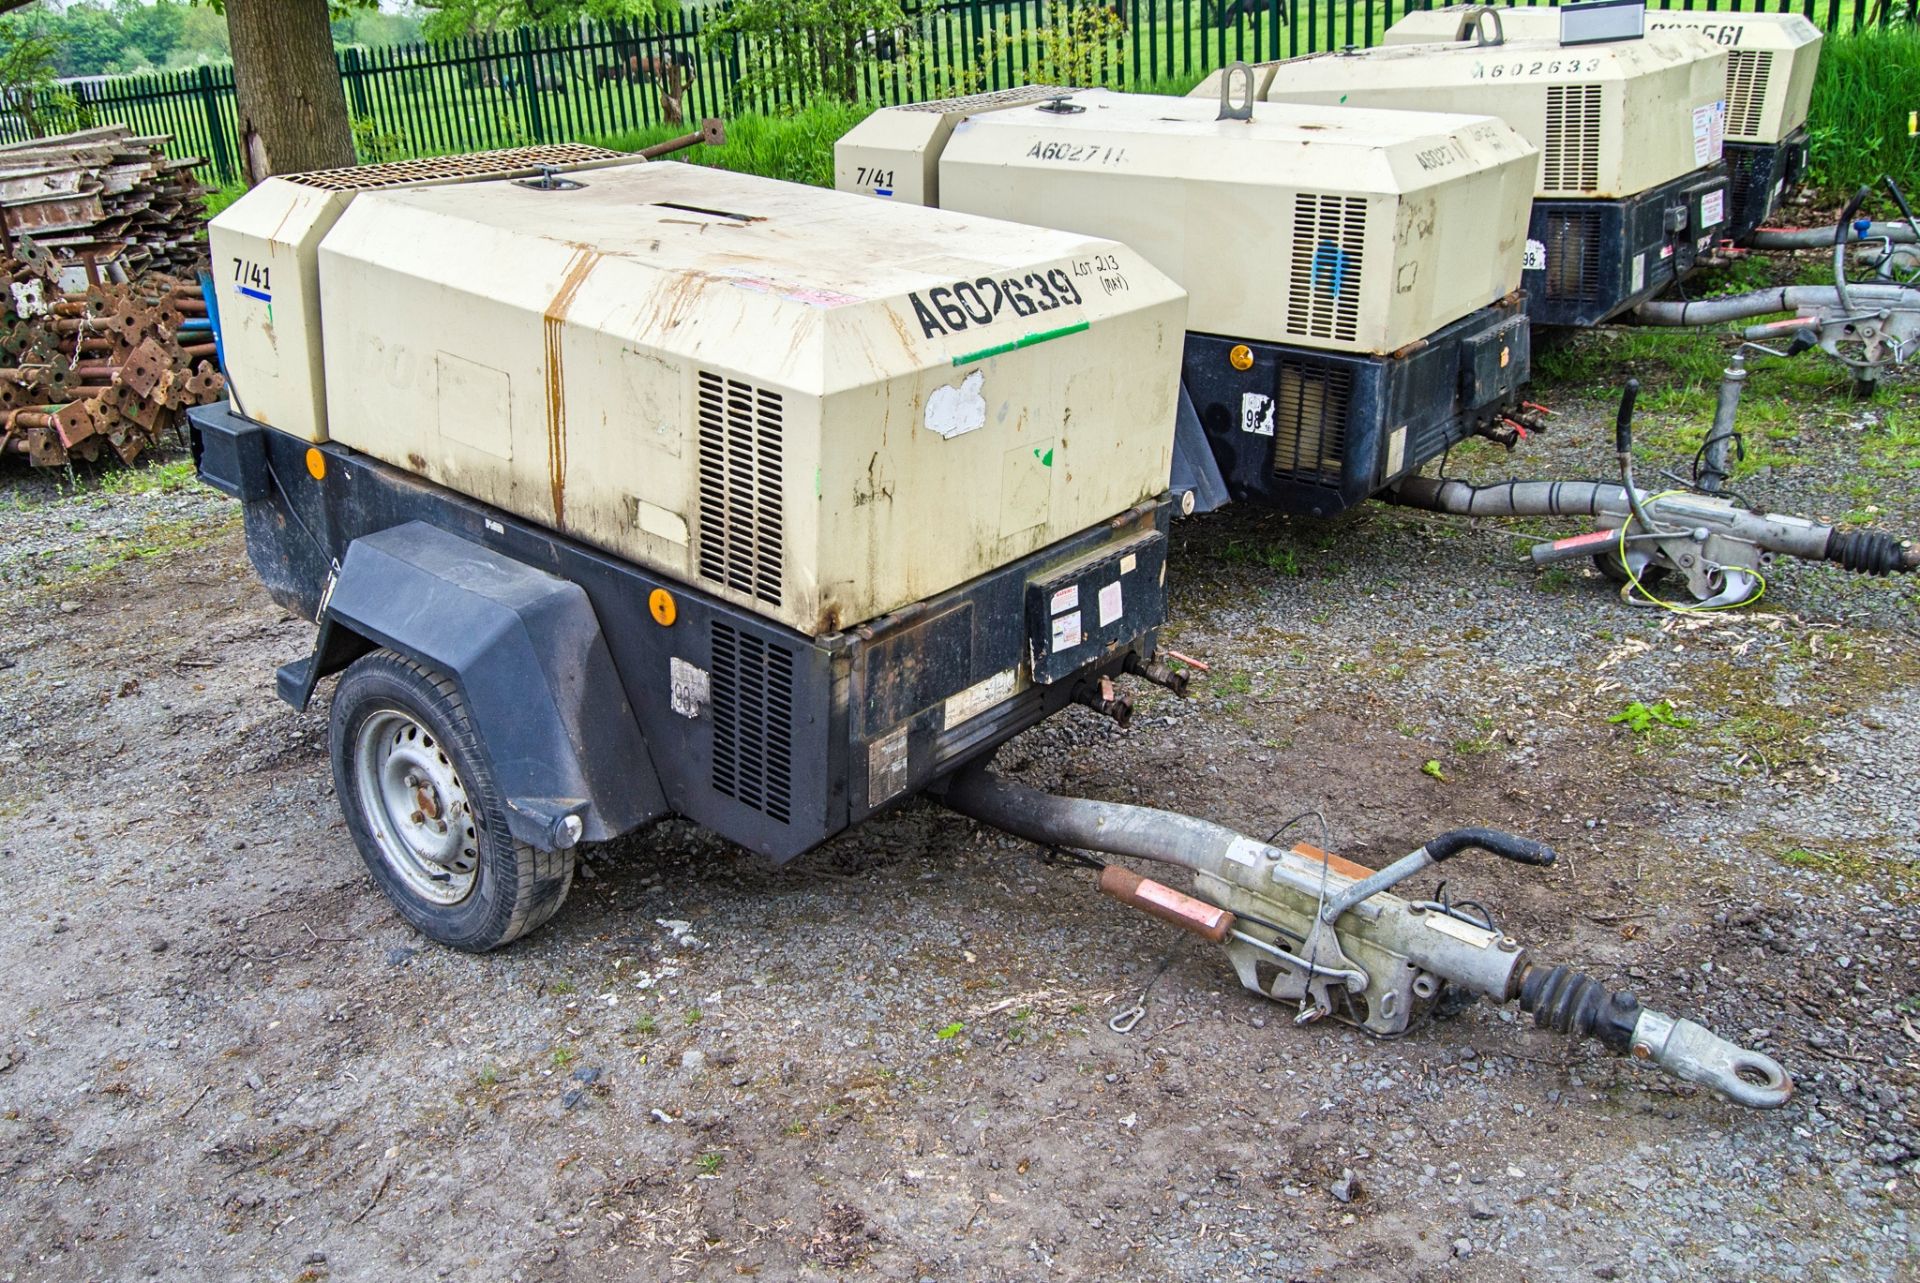 Doosan 741 diesel driven fast tow mobile air compressor Year: 2013 S/N: 432312 Recorded hours: - Image 2 of 9